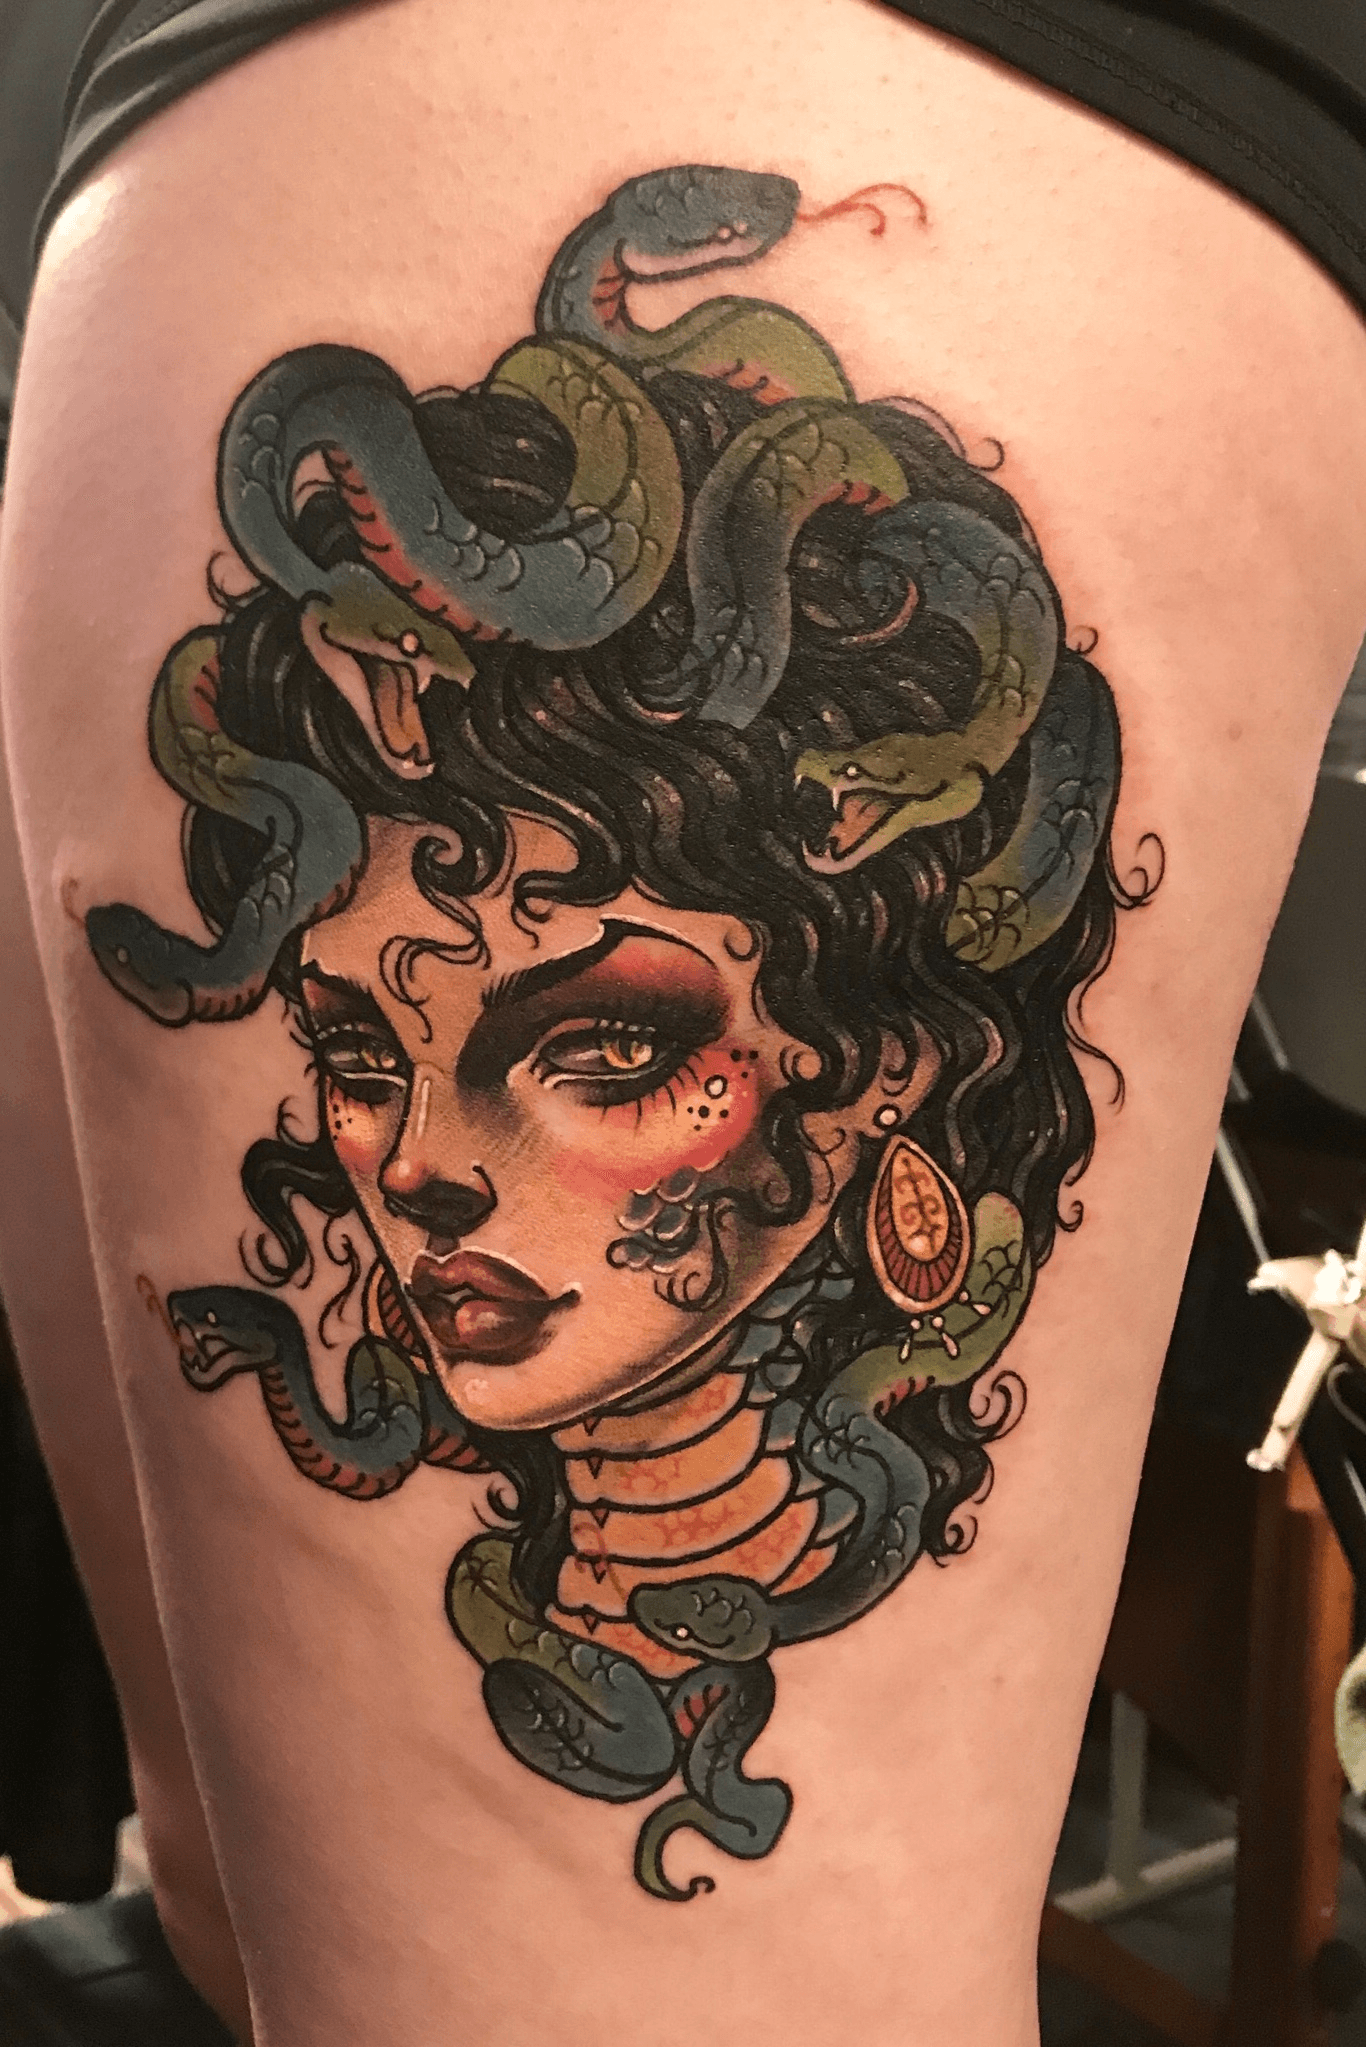 Tattoo uploaded by Vanessa  Id like to have a neotraditional medusa  drinking coffee tattooed megandreamtattoo neotraditional  Tattoodo